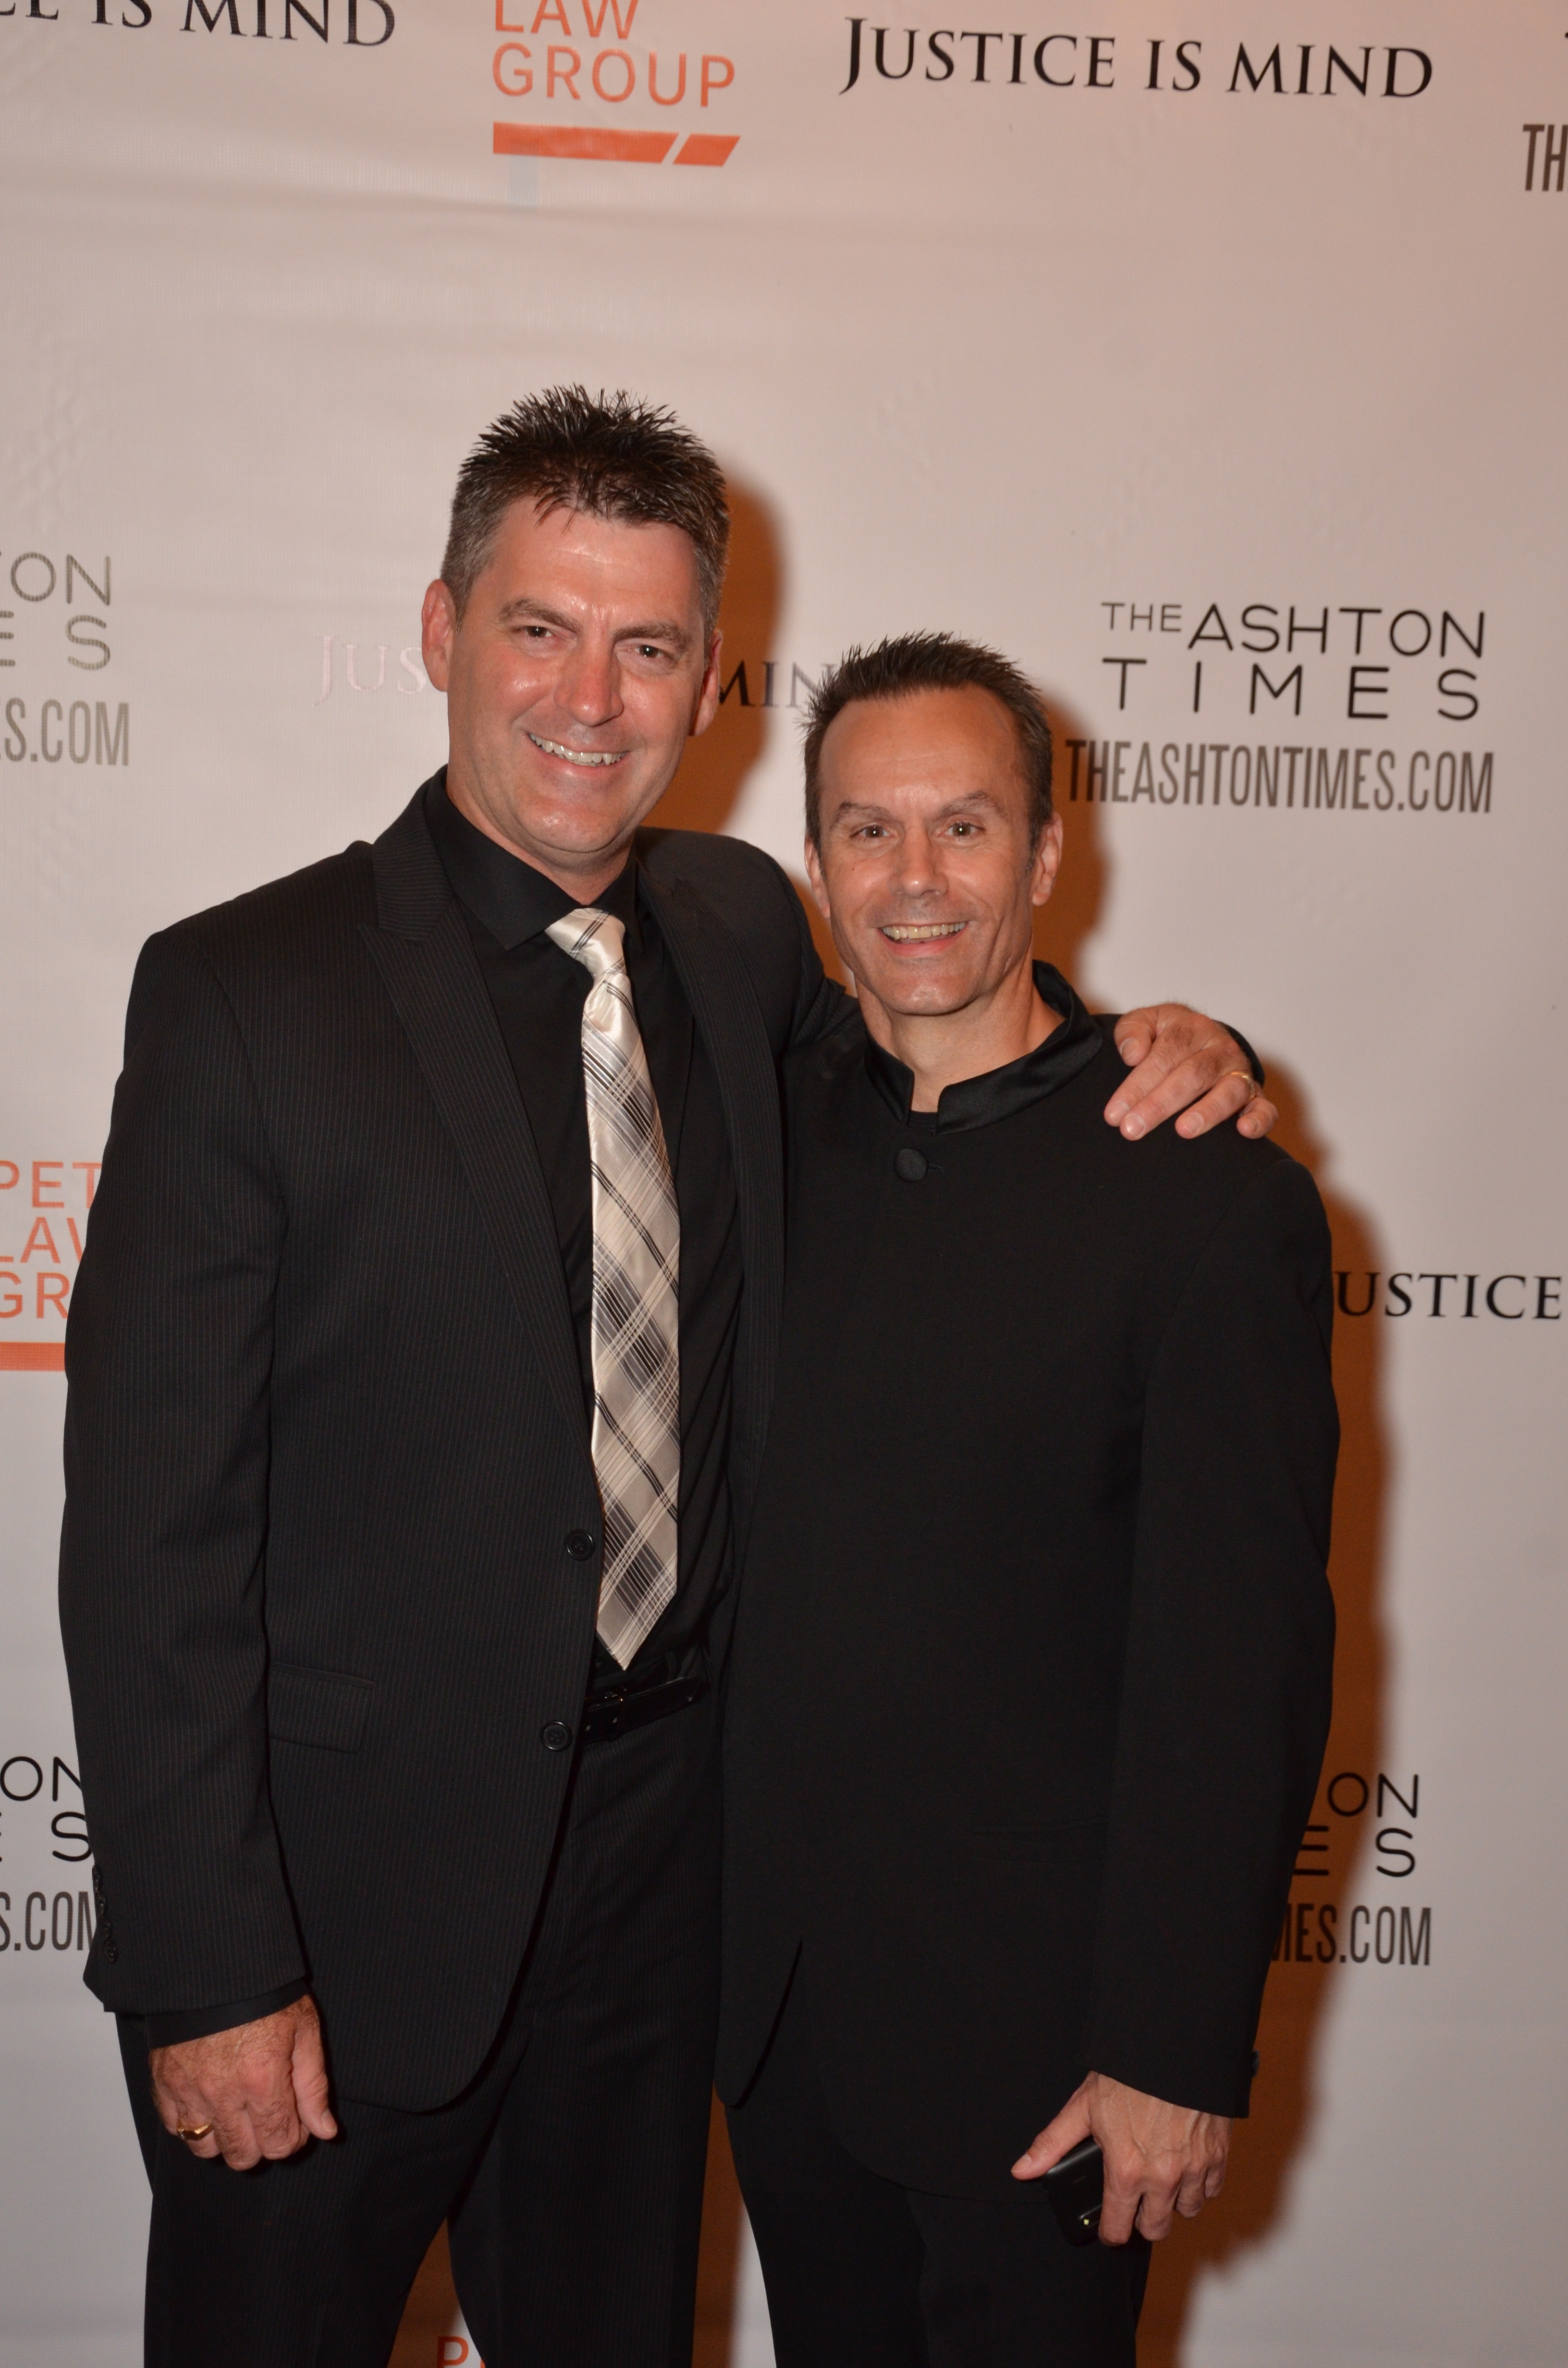 At the world premiere of Justice Is Mind on August 18, 2013 in Albany, NY at The Palace Theatre. Vernon Aldershoff (l), who stars as Henri Miller, with director Mark Lund.